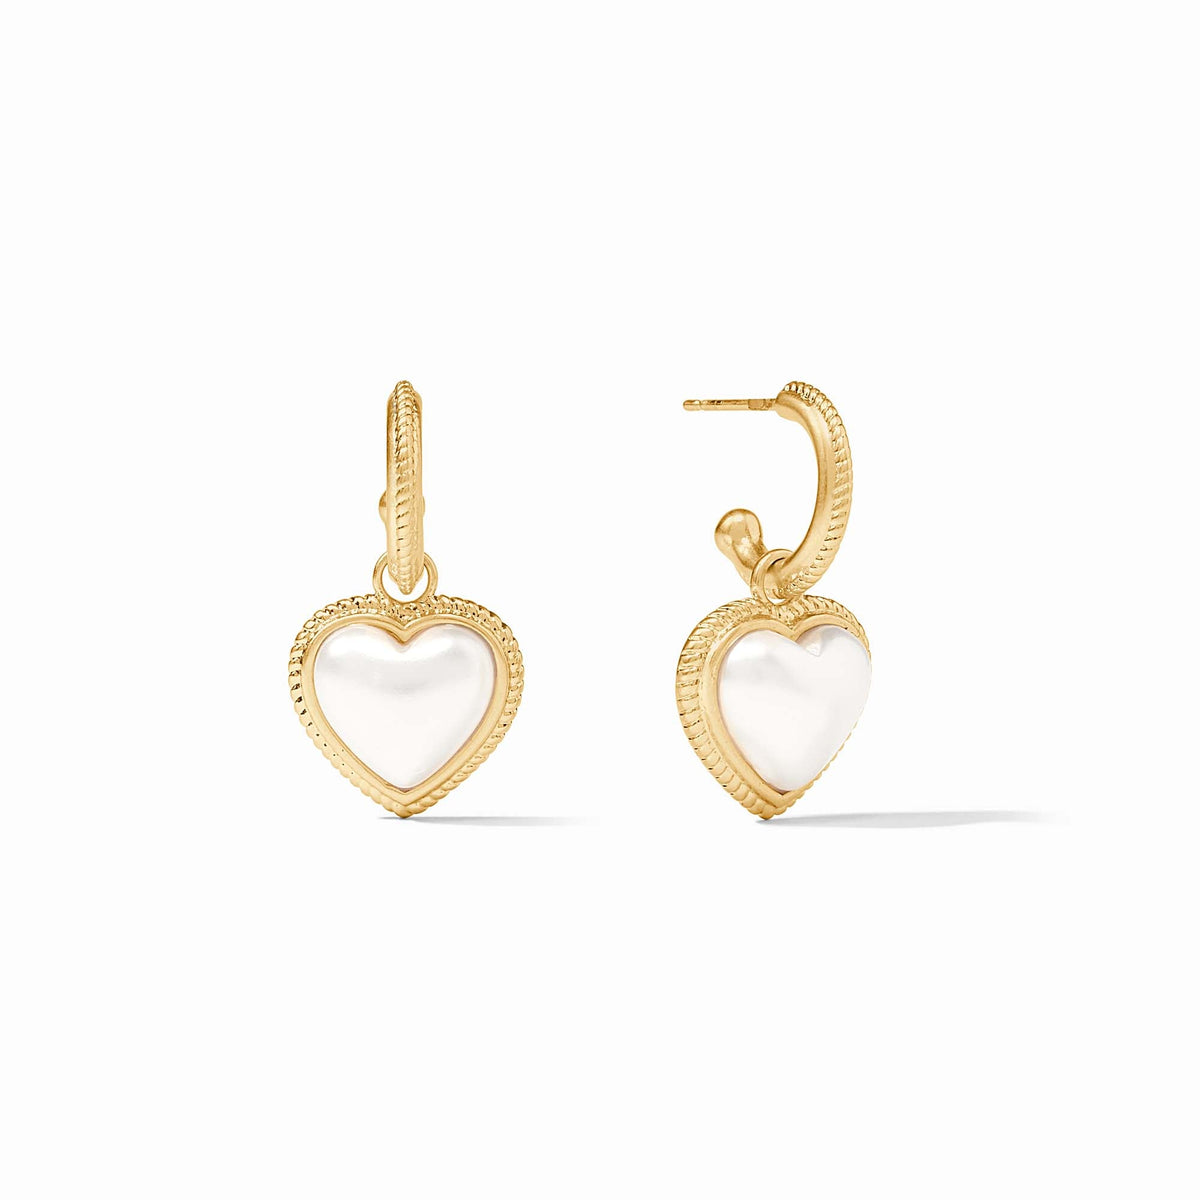 Heart | Collection Julie Vos Jewelry